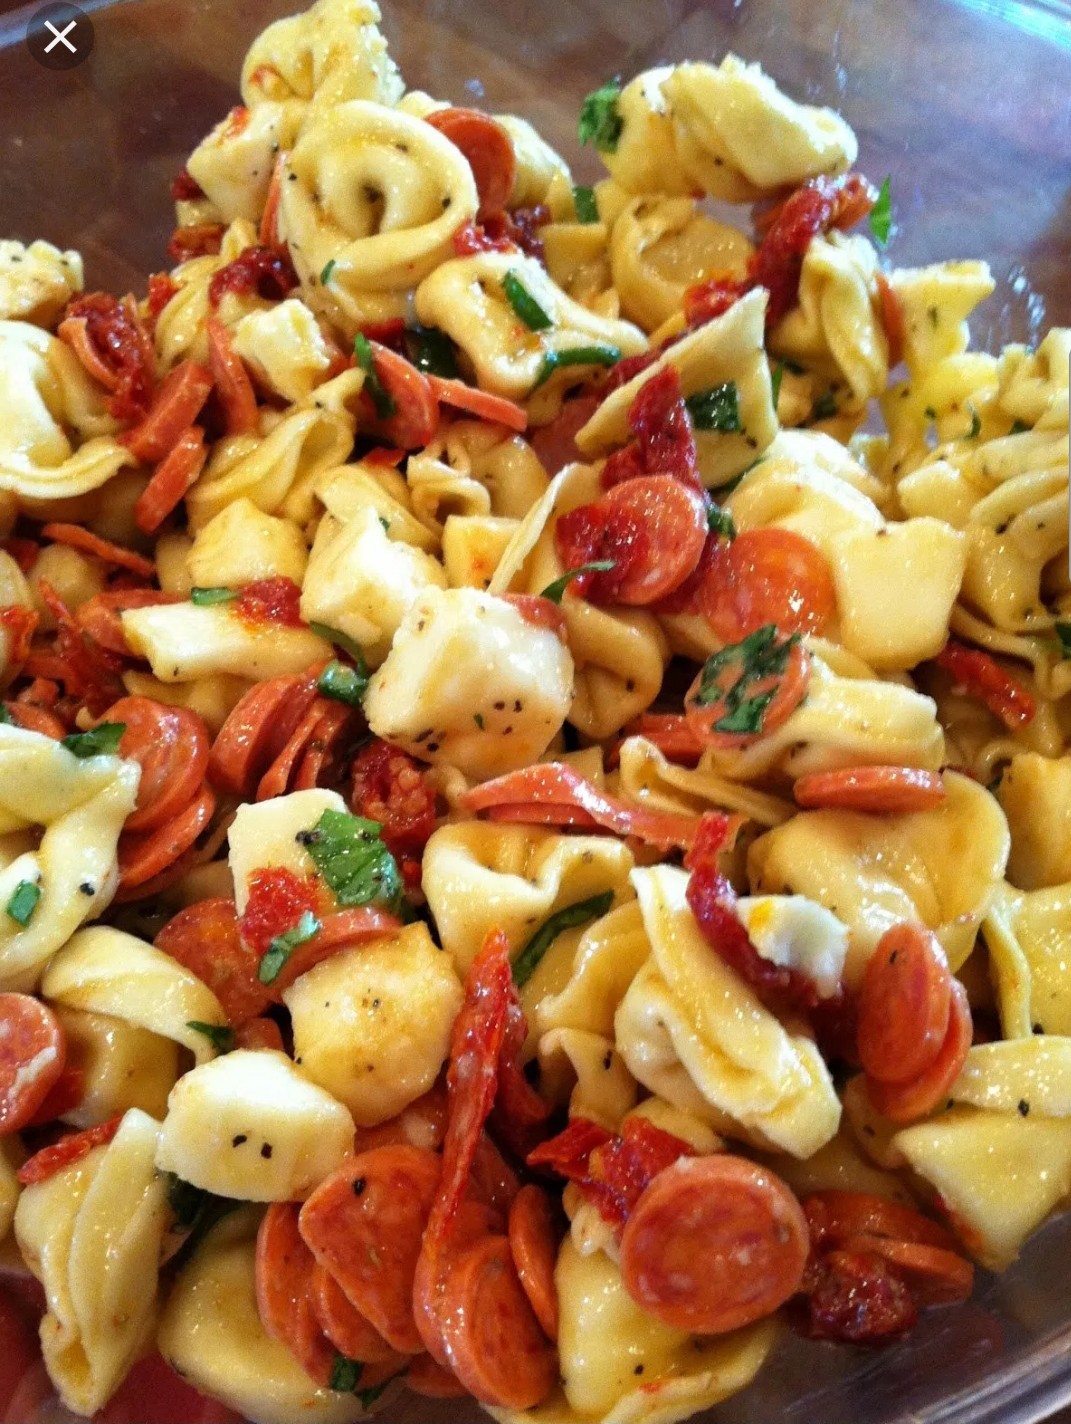 Cheeky monkey Pasta salad | Beth Cidell | Copy Me That